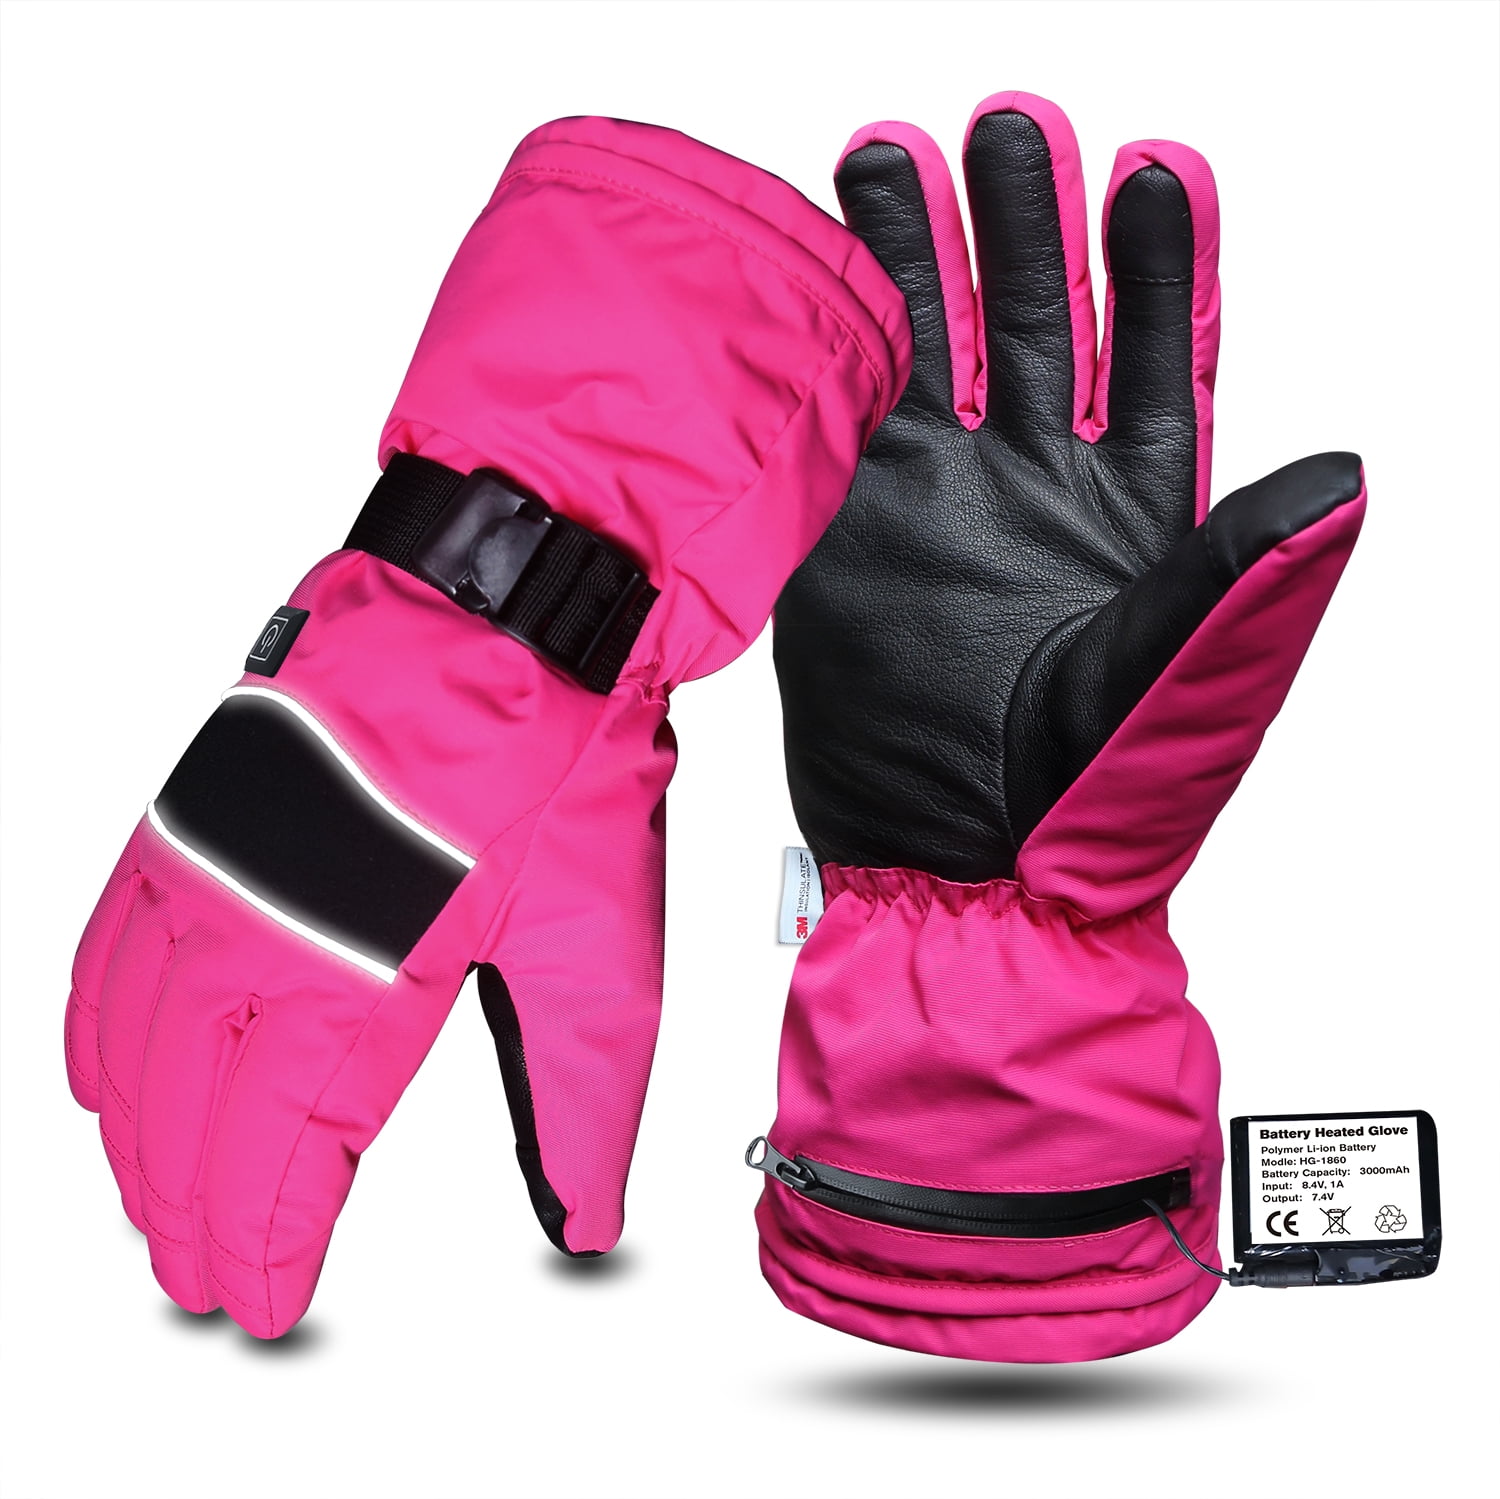 Rechargeable Battery Heated Gloves Waterproof Skiing Gloves with 3M Thinsulate Dr.Warm Heated Gloves for Men Women 